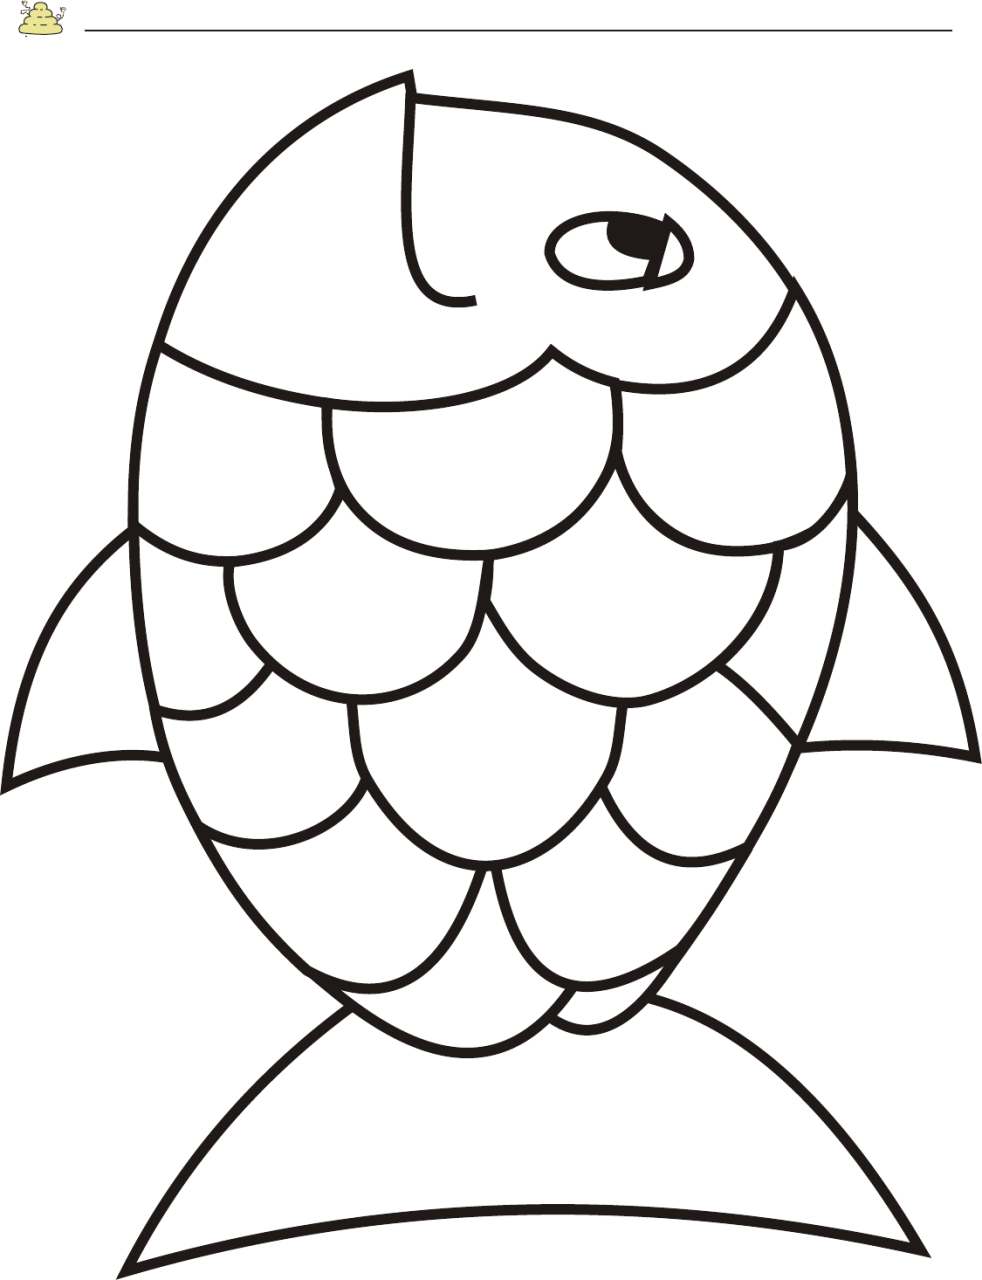 Blank Rainbow Fish Coloring Page